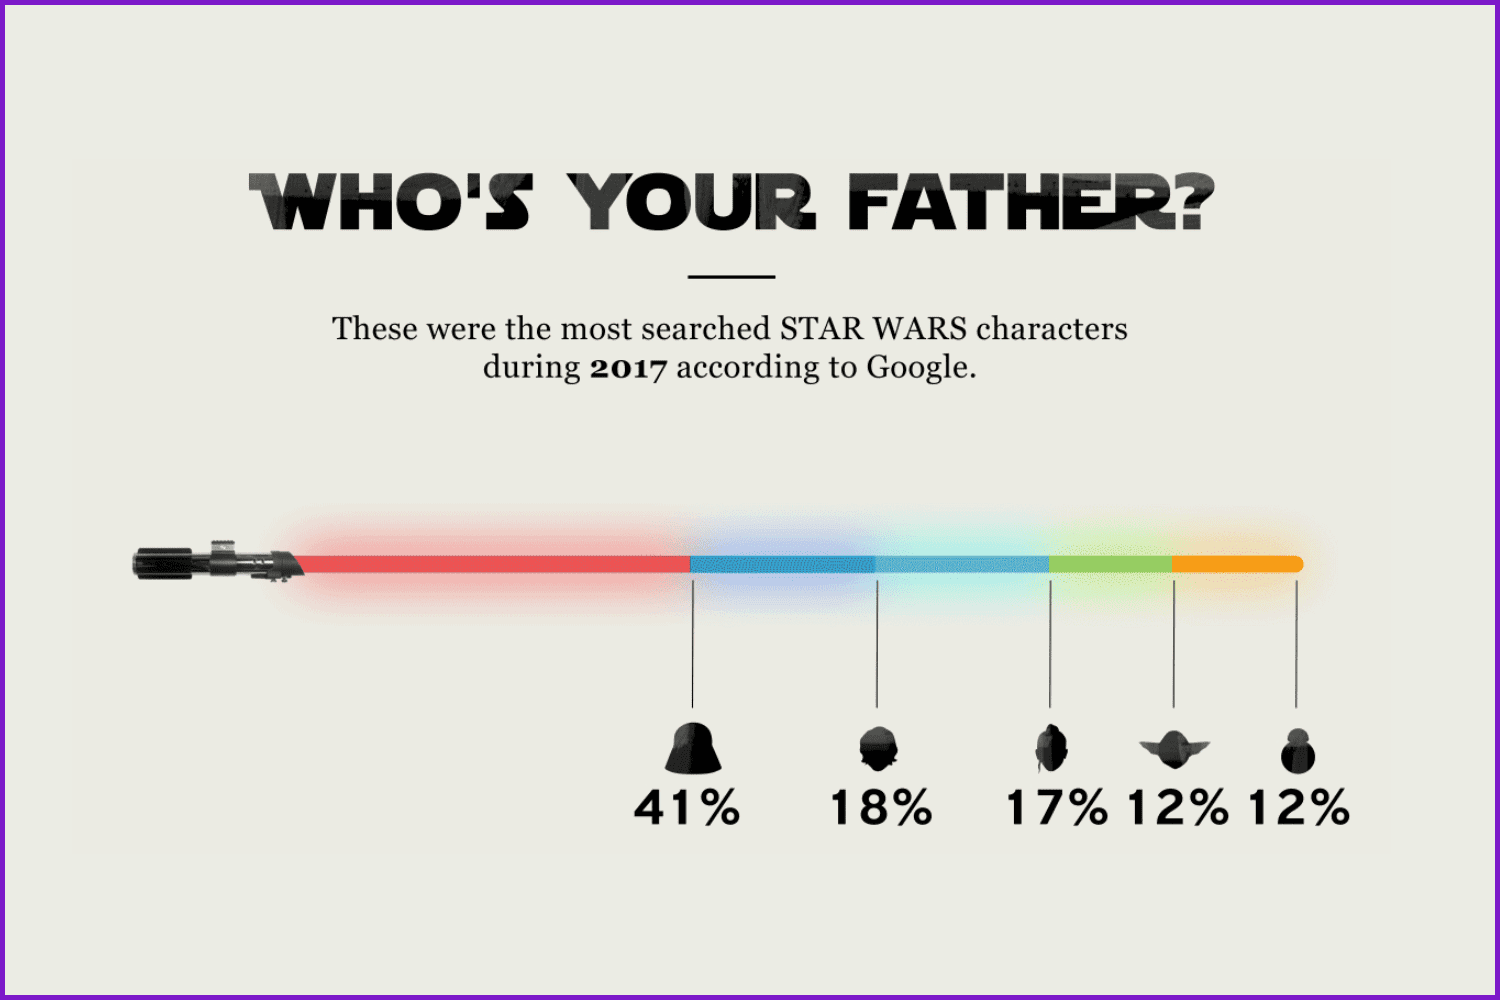 Who's your father infographic chart.